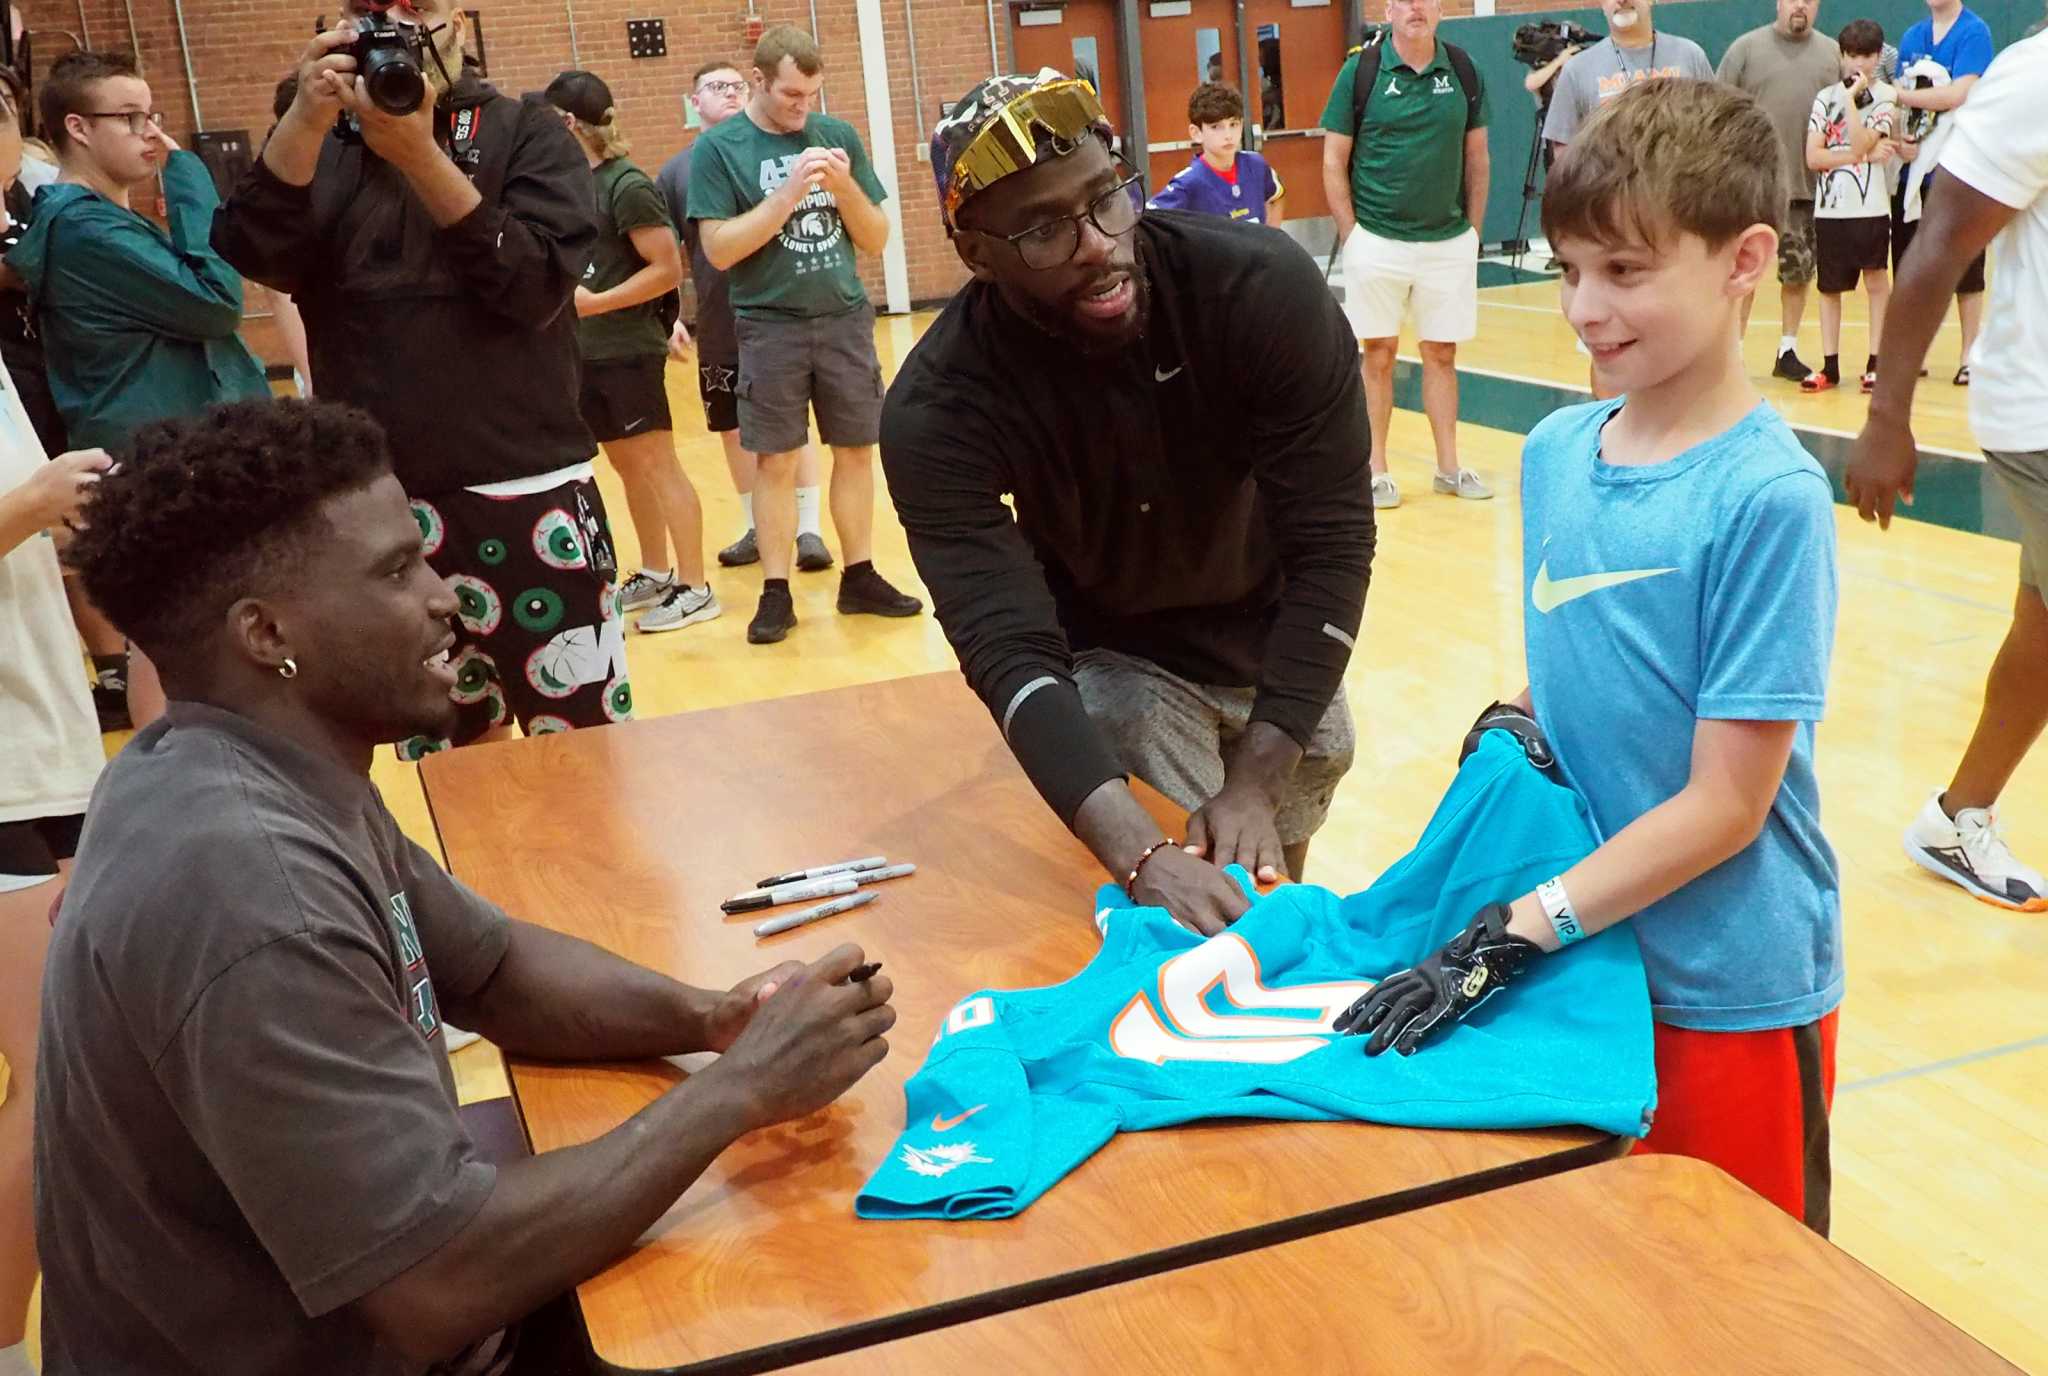 Miami Dolphins wide receiver Tyreek Hill brings NFL flash to Connecticut with youth camp in Meriden